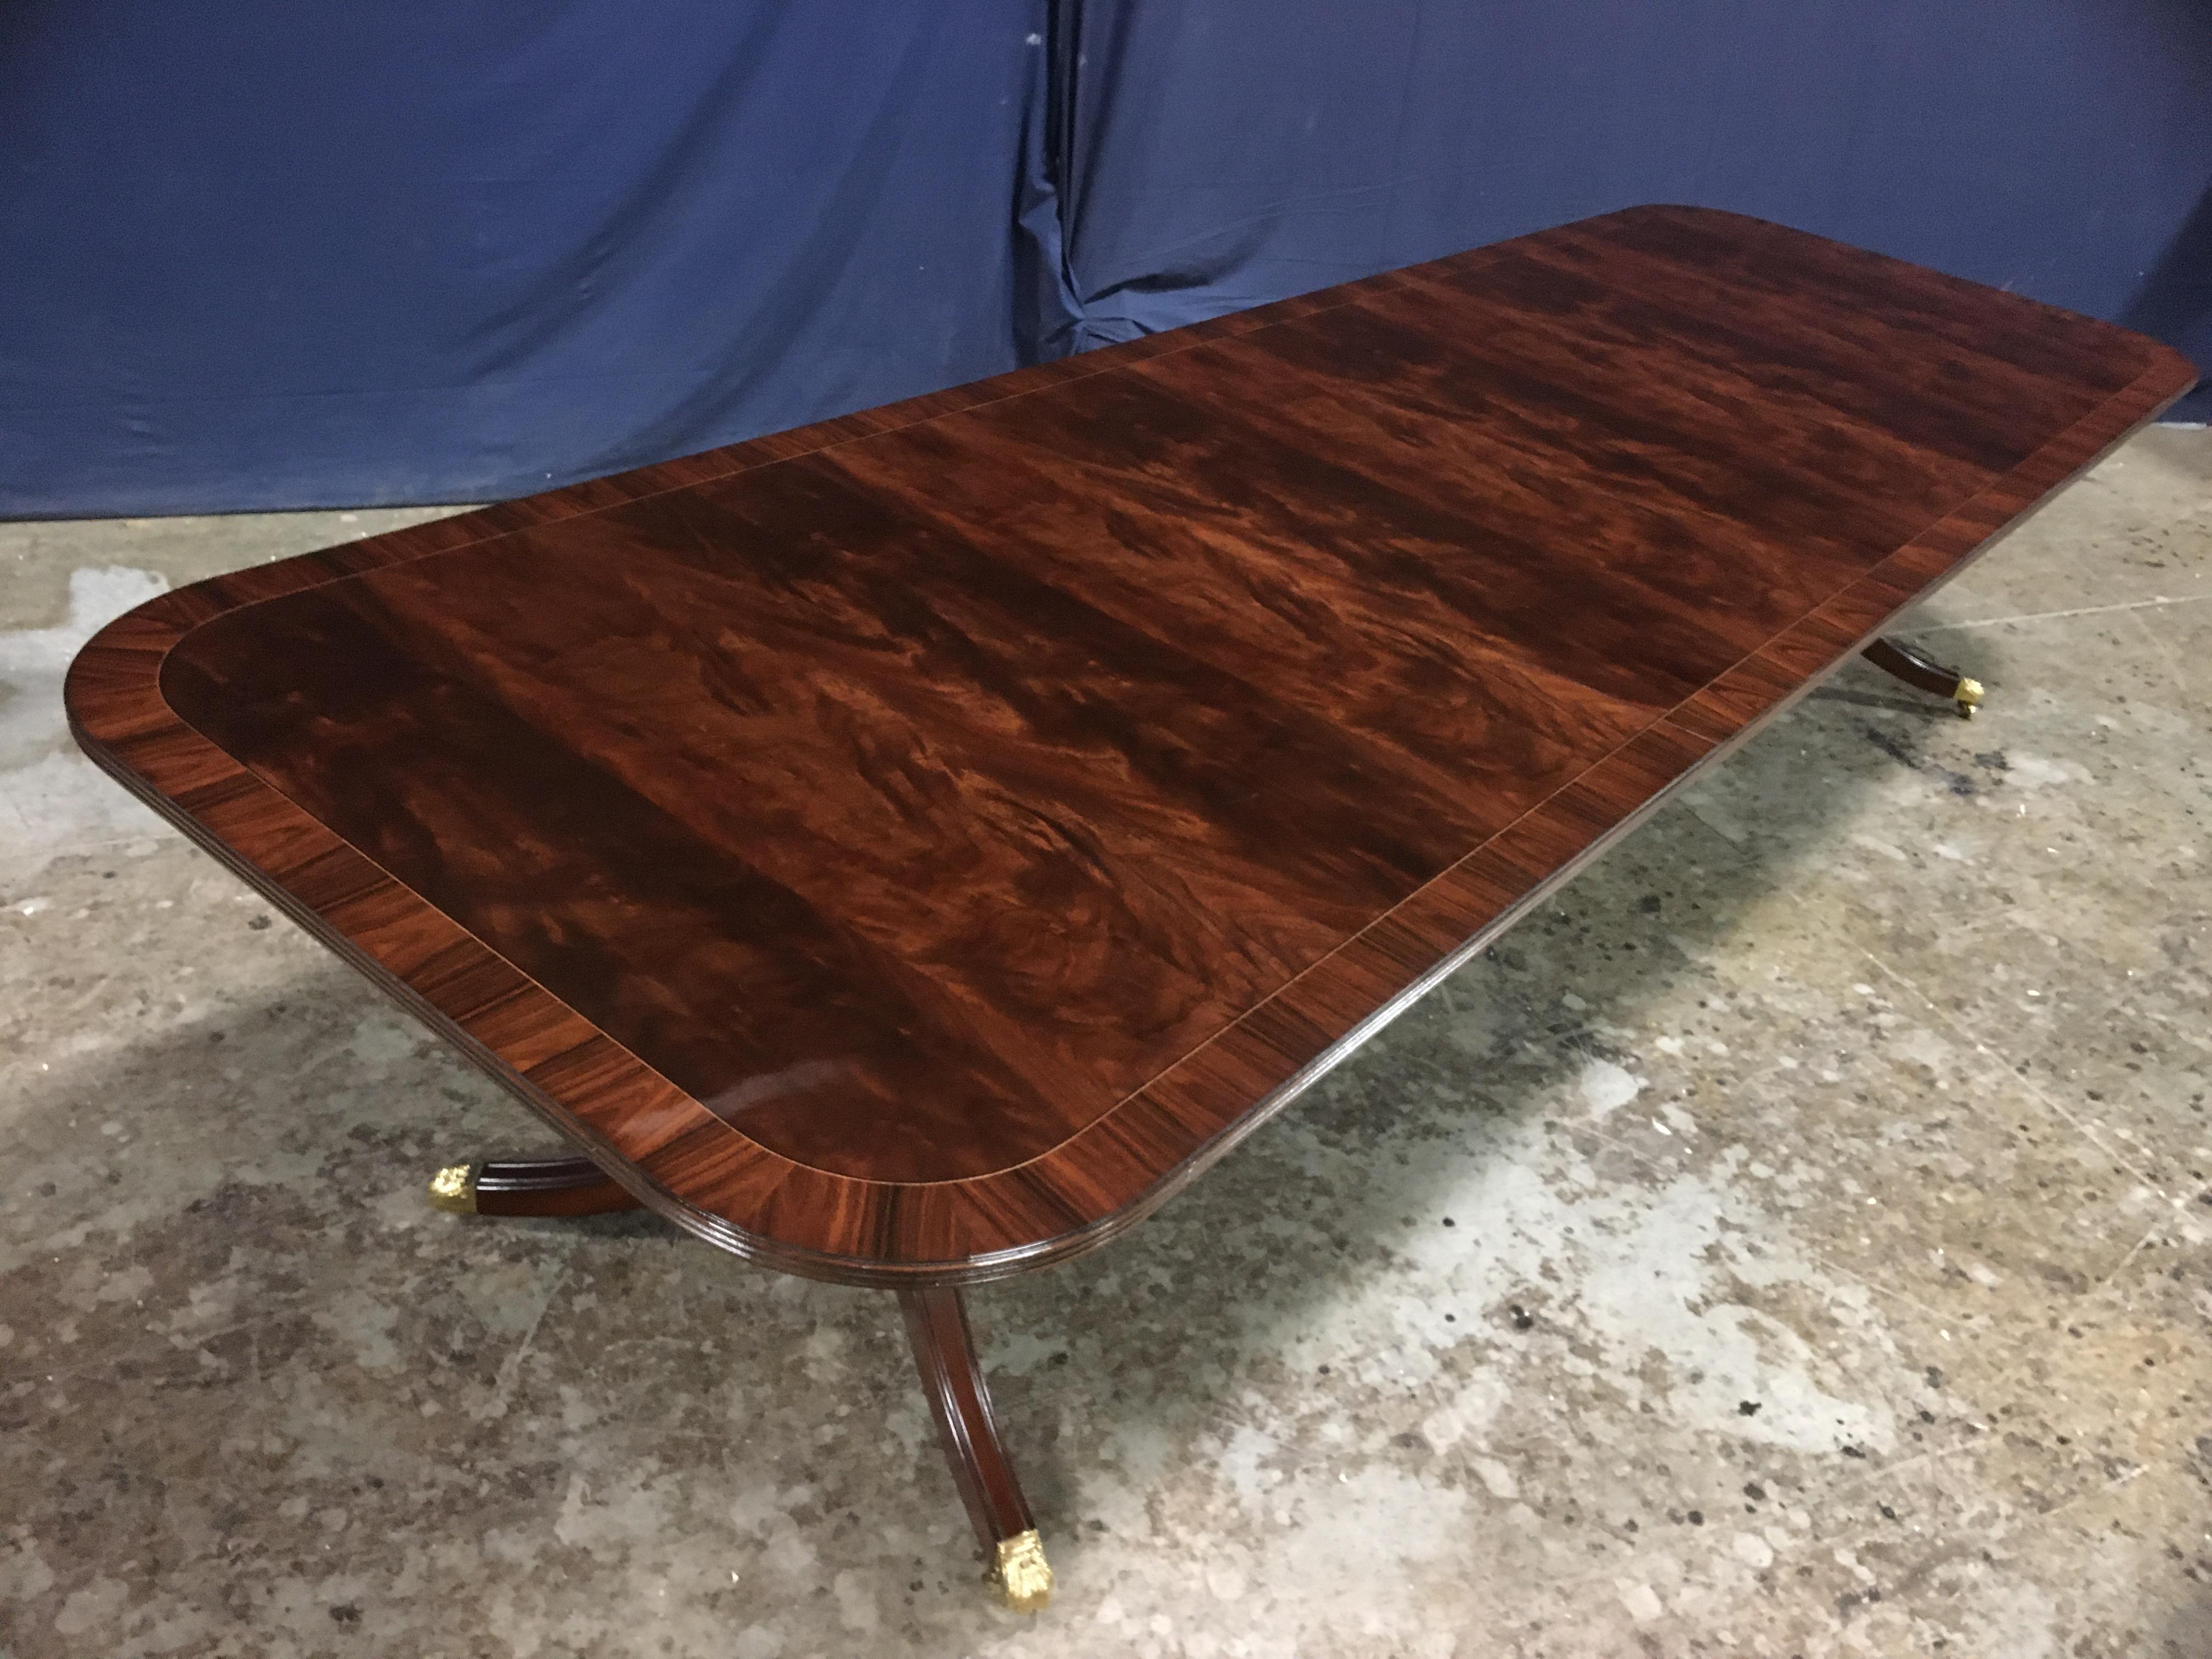 This is a made-to-order traditional mahogany dining table made in the Leighton Hall shop. It features a field of reverse slip-matched swirly crotch mahogany from west Africa and a Santos rosewood border from South America. It has a hand rubbed and